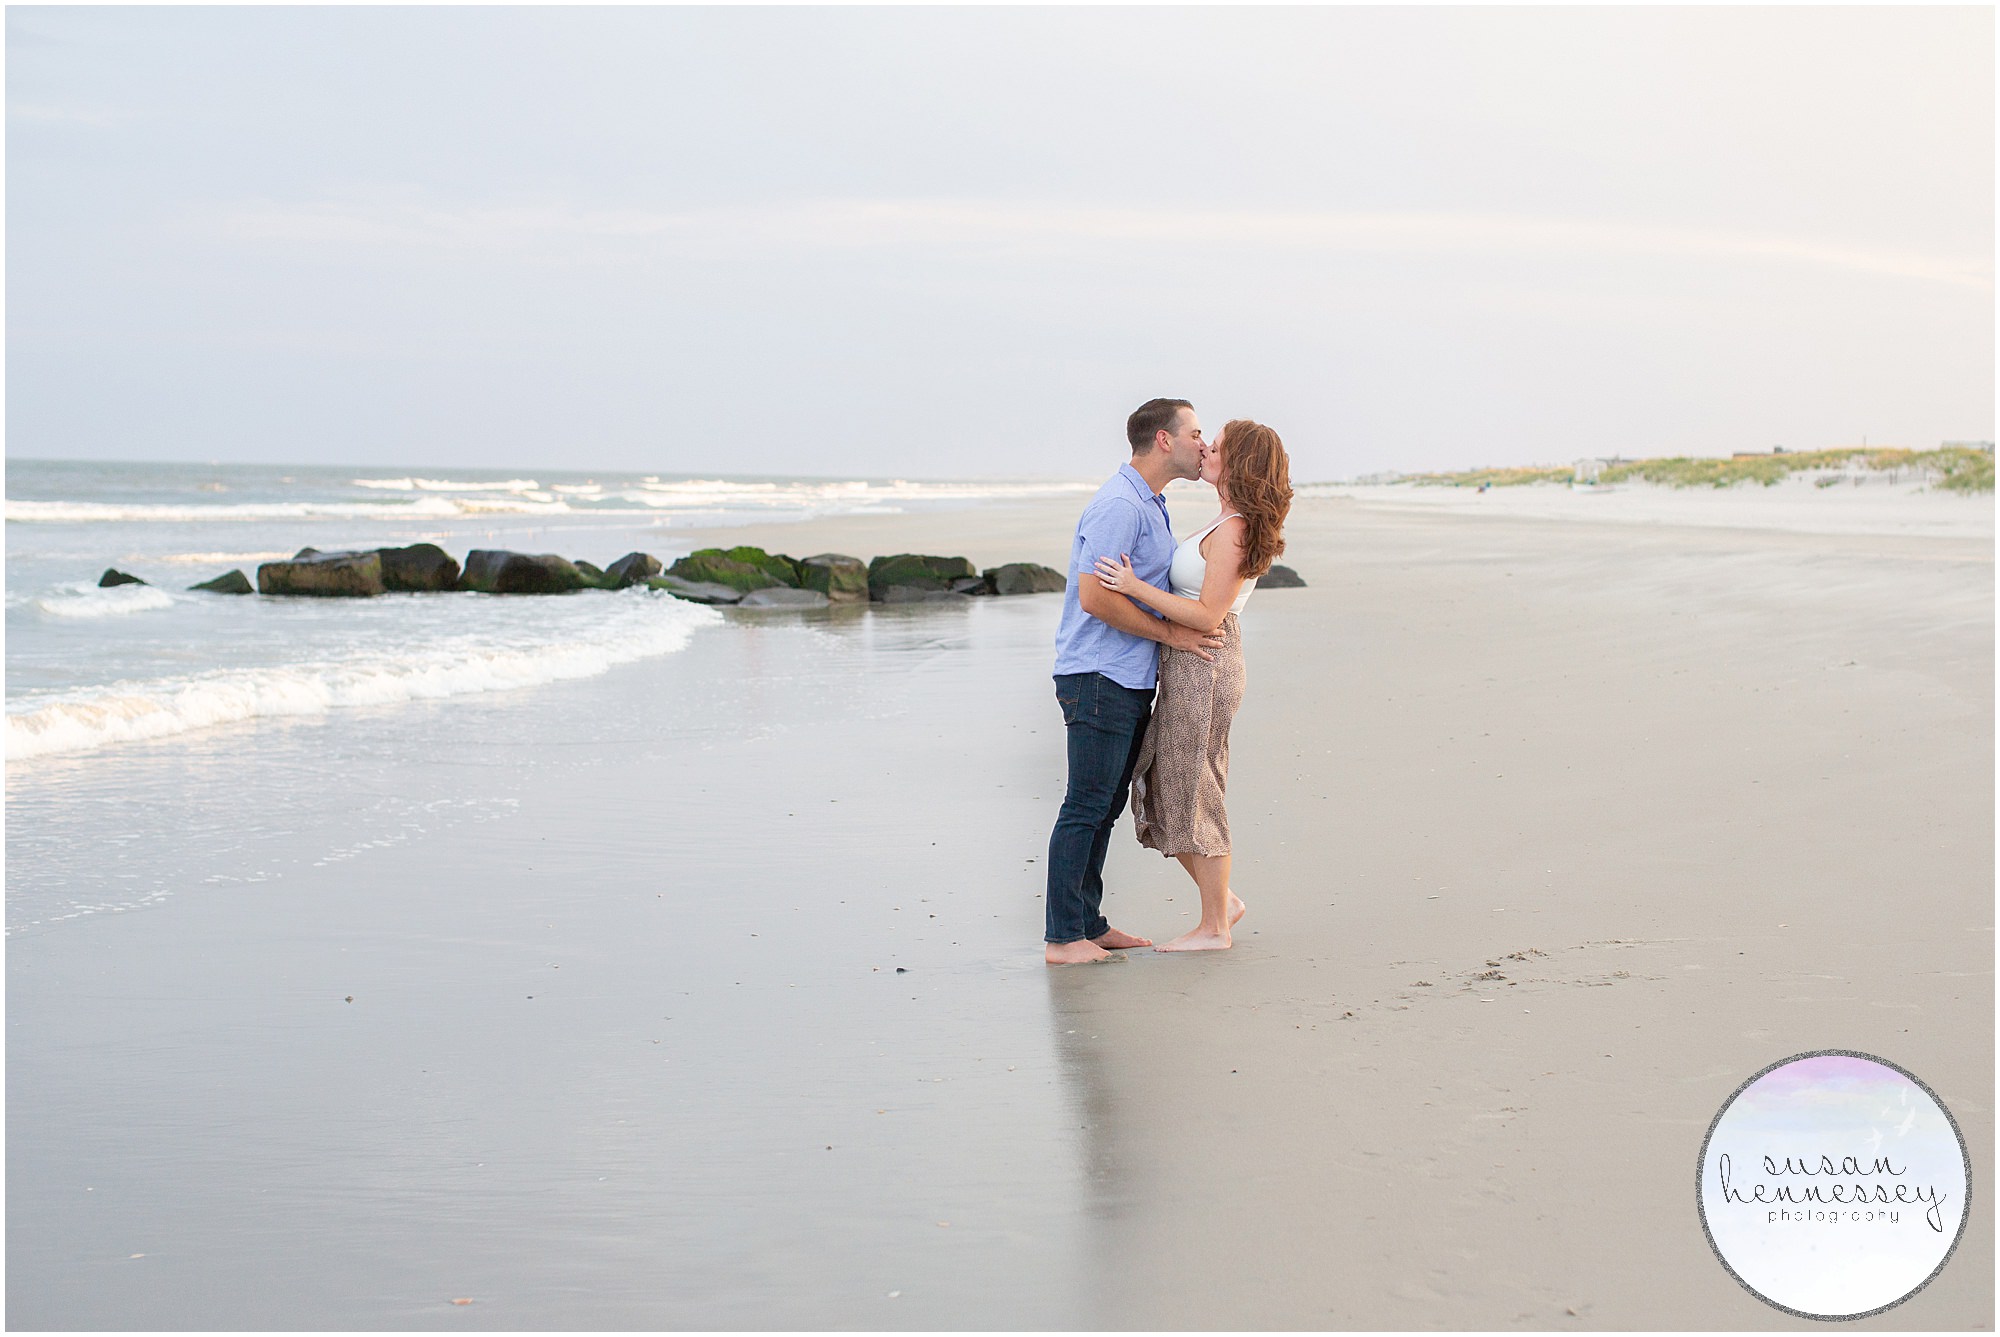 Engagement session after the proposal at the Jersey Shore